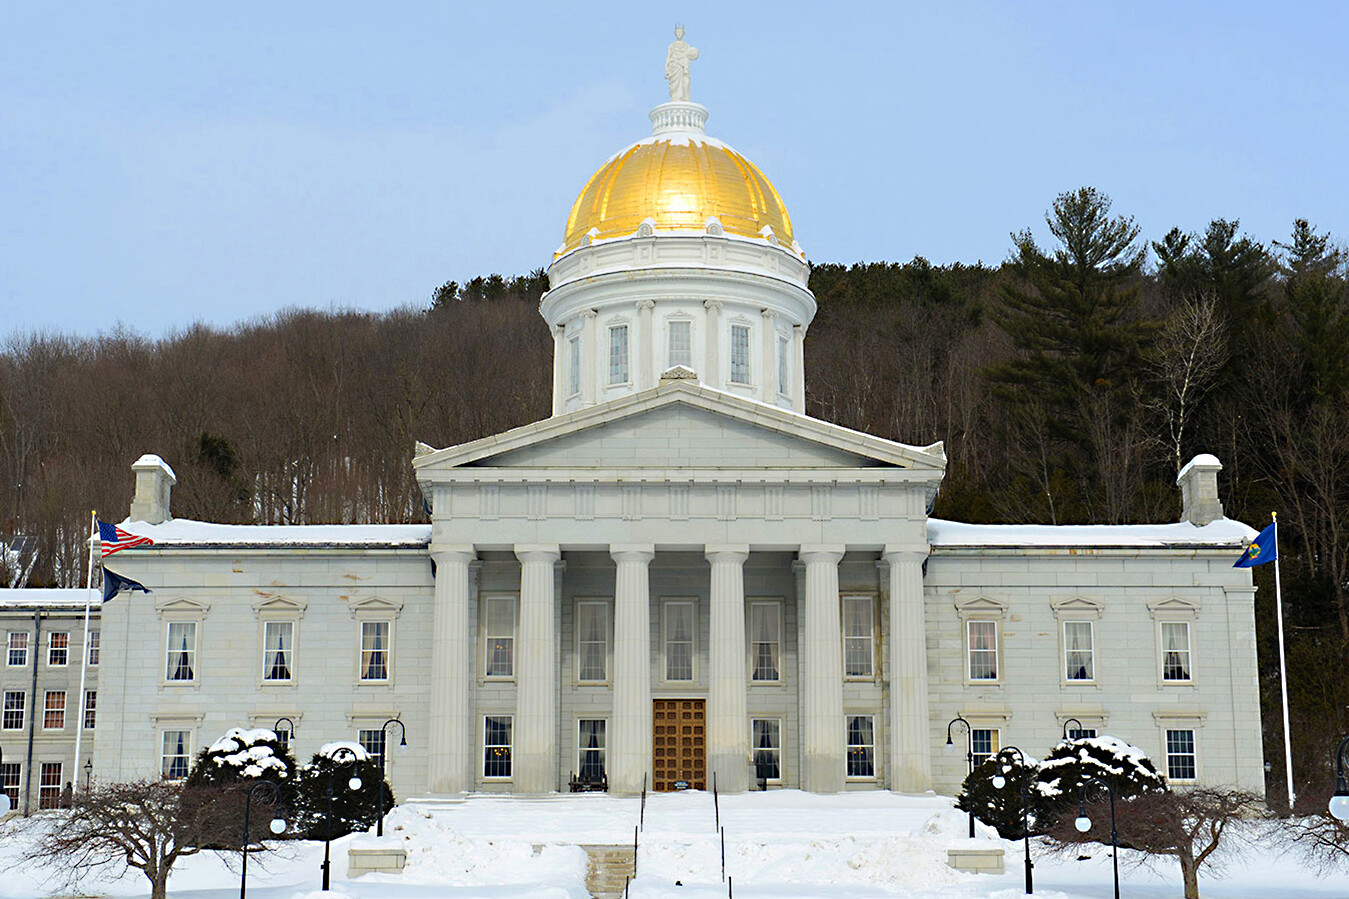 The Vermont State House building